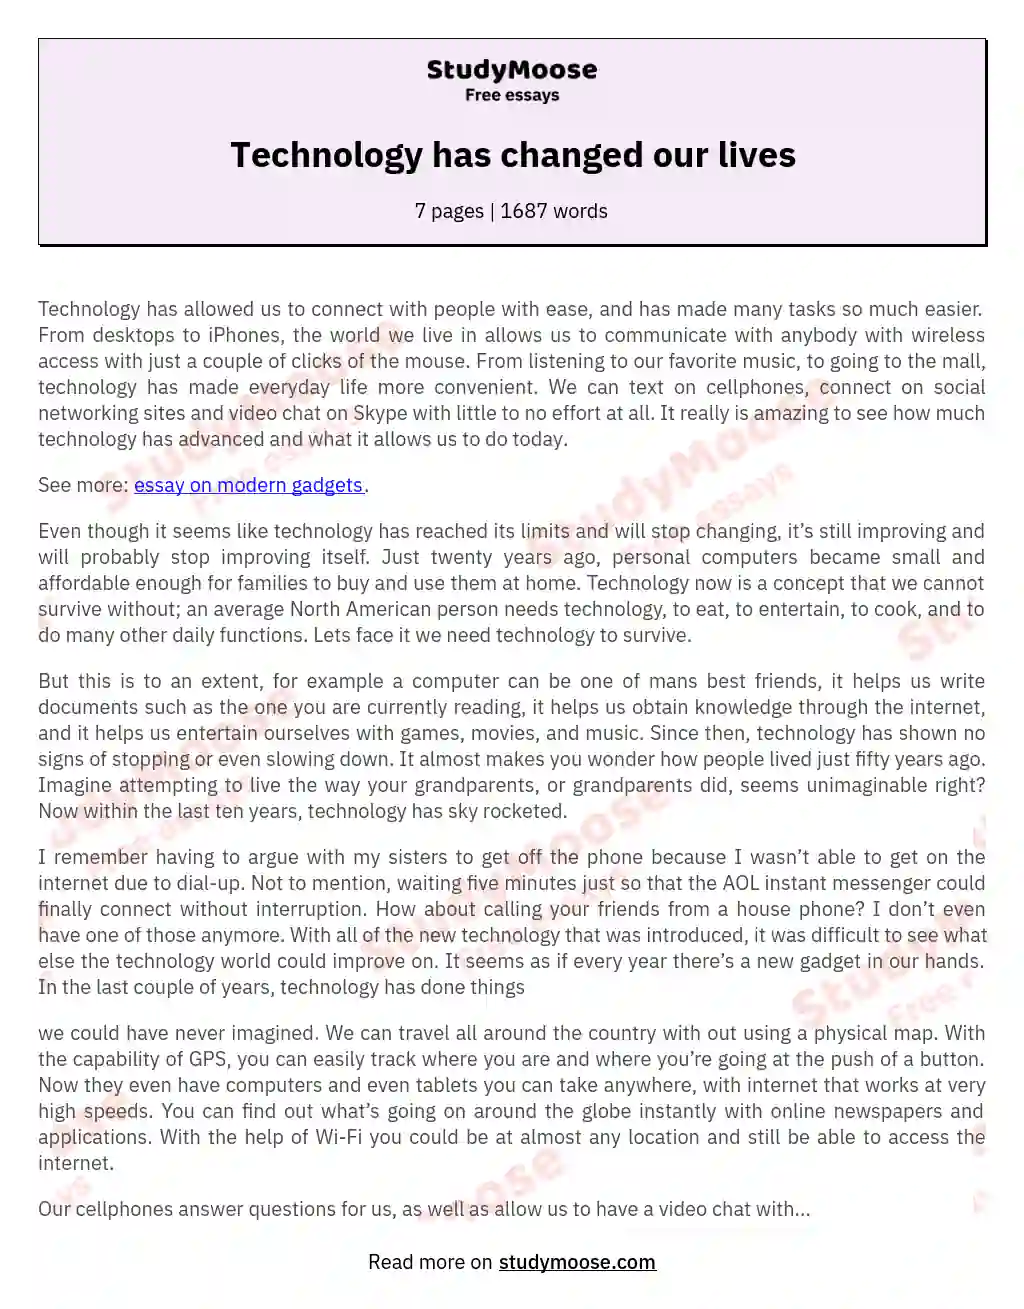 internet that changed our lives essay